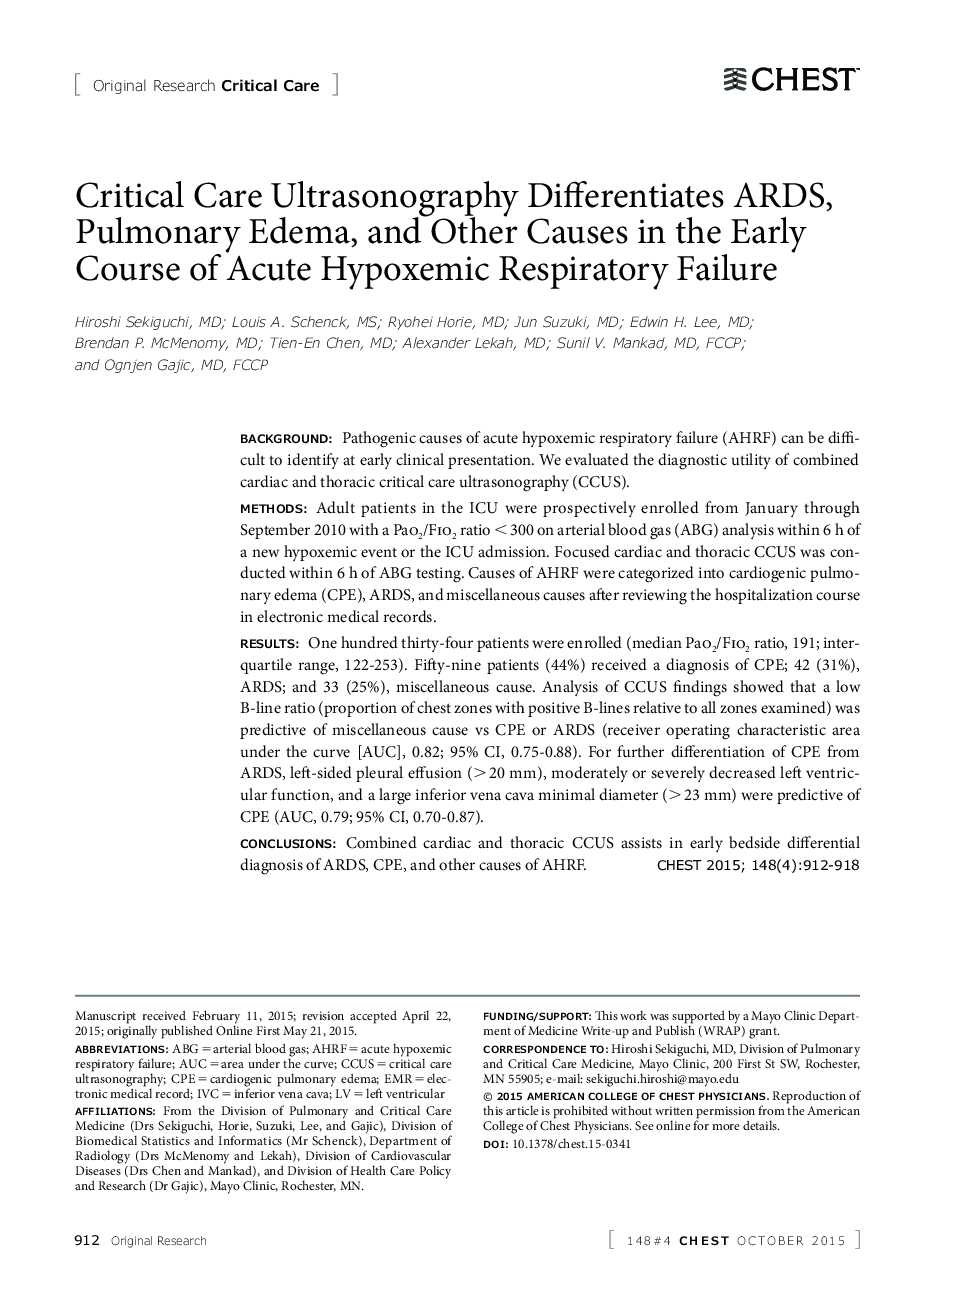 Original ResearchCritical CareCritical Care Ultrasonography Differentiates ARDS, Pulmonary Edema, and Other Causes in the Early Course of Acute Hypoxemic Respiratory Failure